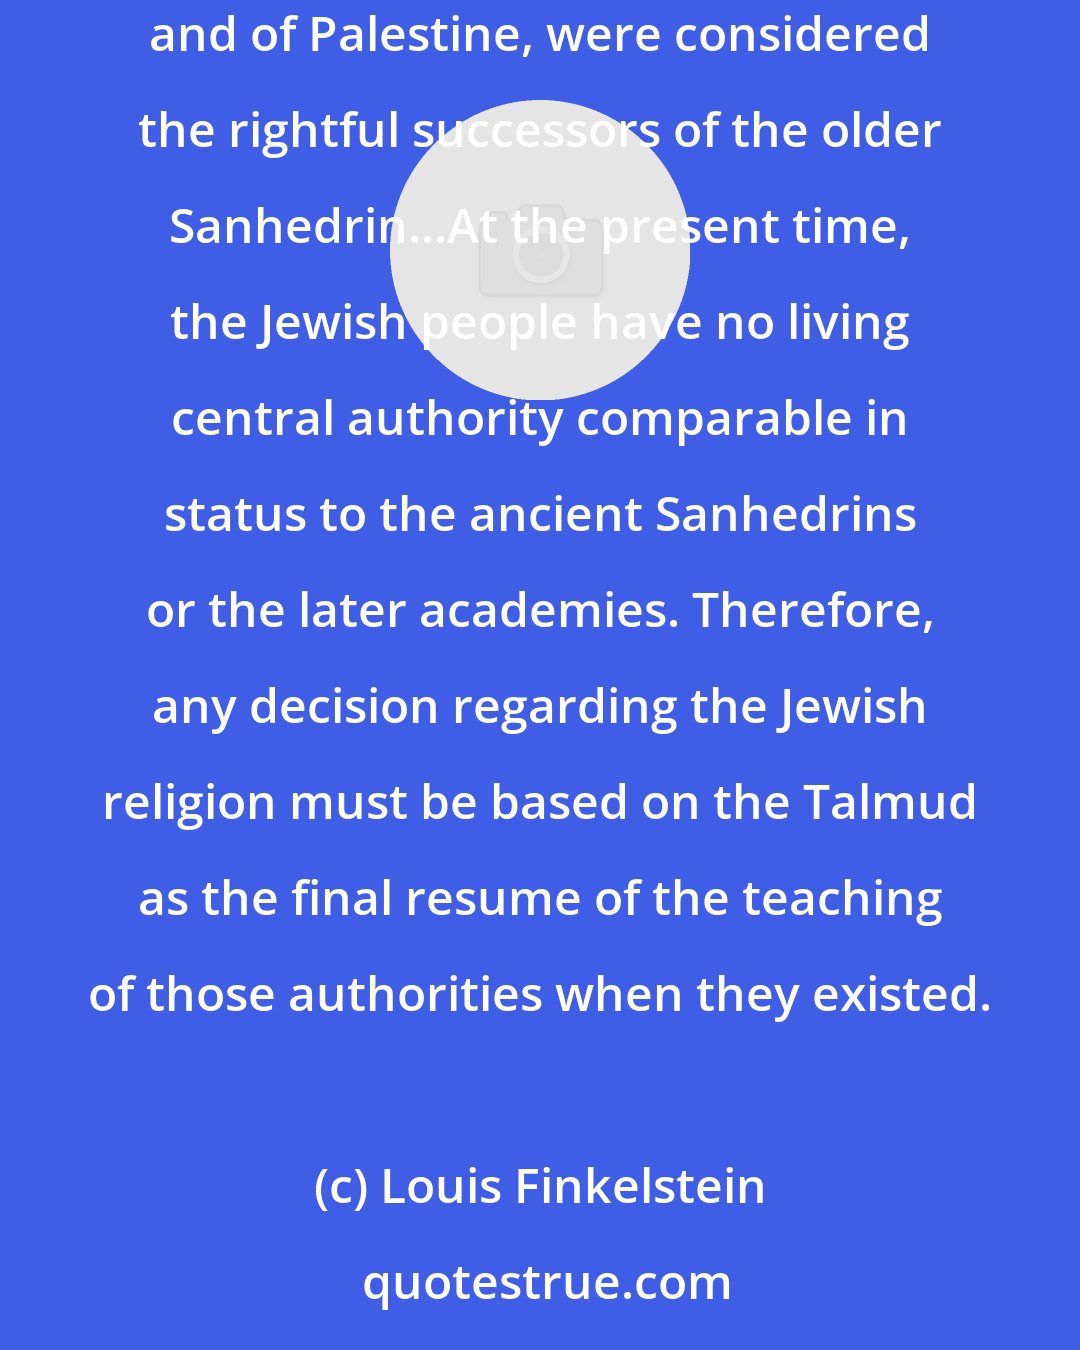 Louis Finkelstein: The Talmud derives its authority from the position held by the ancient (Pharisee) academies. The teachers of those academies, both of Babylonia and of Palestine, were considered the rightful successors of the older Sanhedrin...At the present time, the Jewish people have no living central authority comparable in status to the ancient Sanhedrins or the later academies. Therefore, any decision regarding the Jewish religion must be based on the Talmud as the final resume of the teaching of those authorities when they existed.